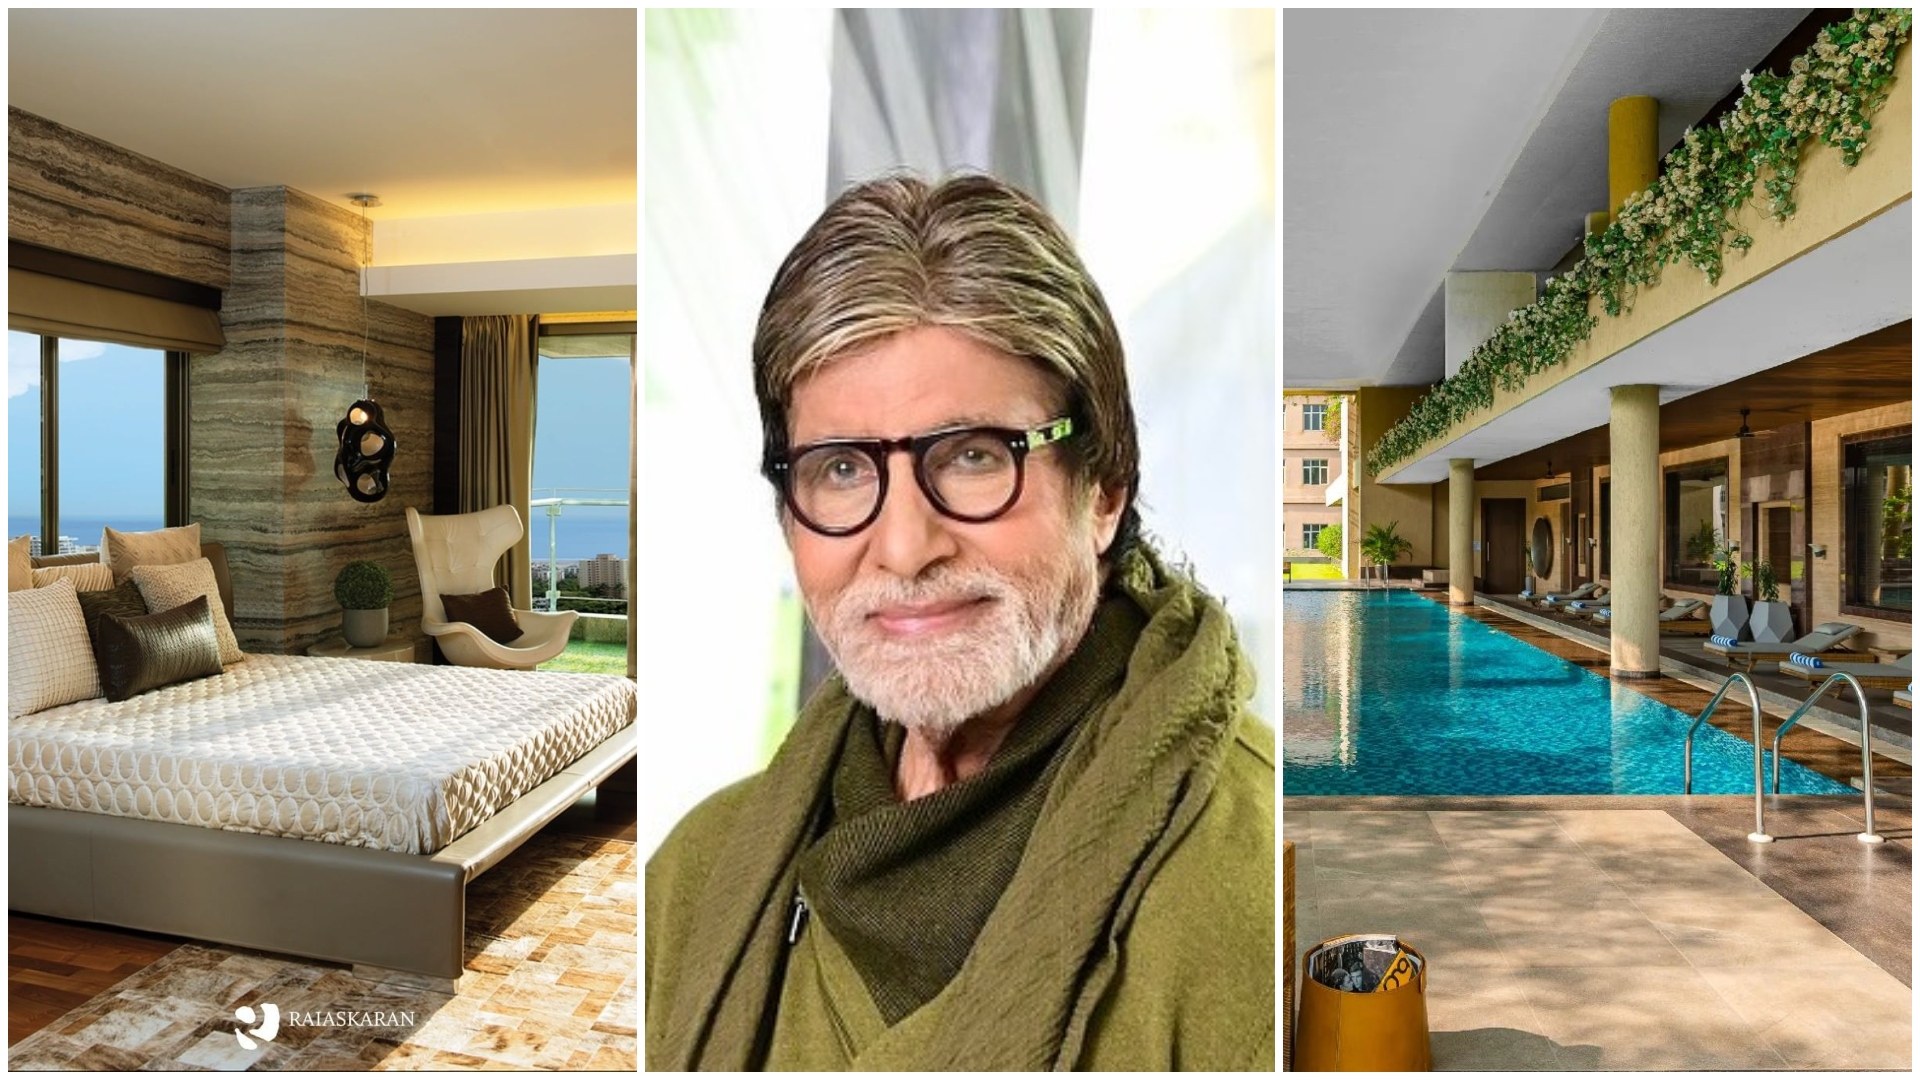 Amitabh Bachchan and his new sea-facing apartment, on the 31st floor of Parthenon, a building in Mumbai’s Four Bungalows area, constructed by prominent city-based luxury-apartment developer Raiaskaran. Photos: @amitabhbachchan, @raiaskaran/Instagram
